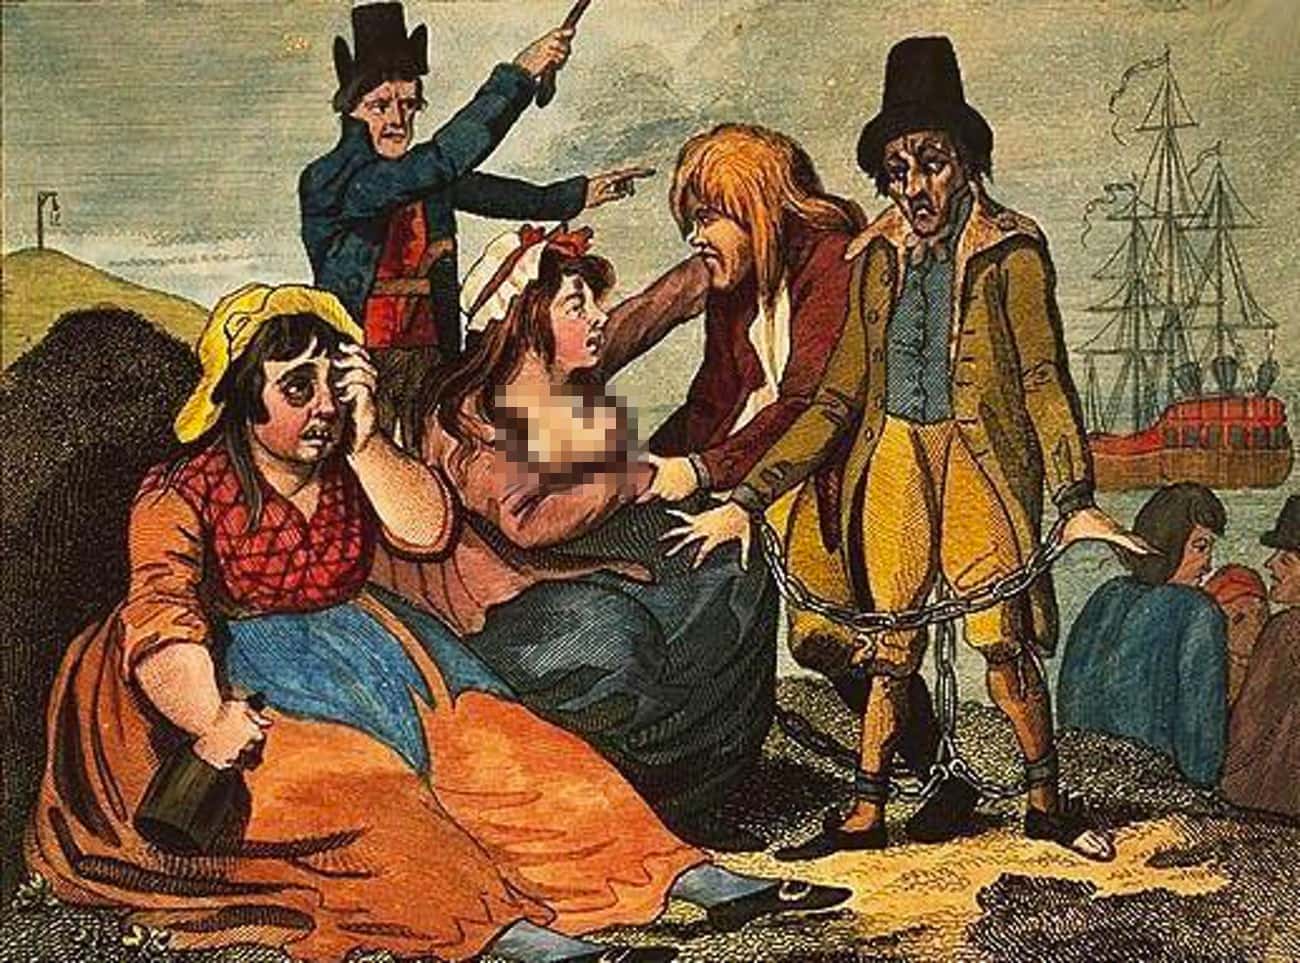 Female Convicts Were Often Forced Into Prostitution